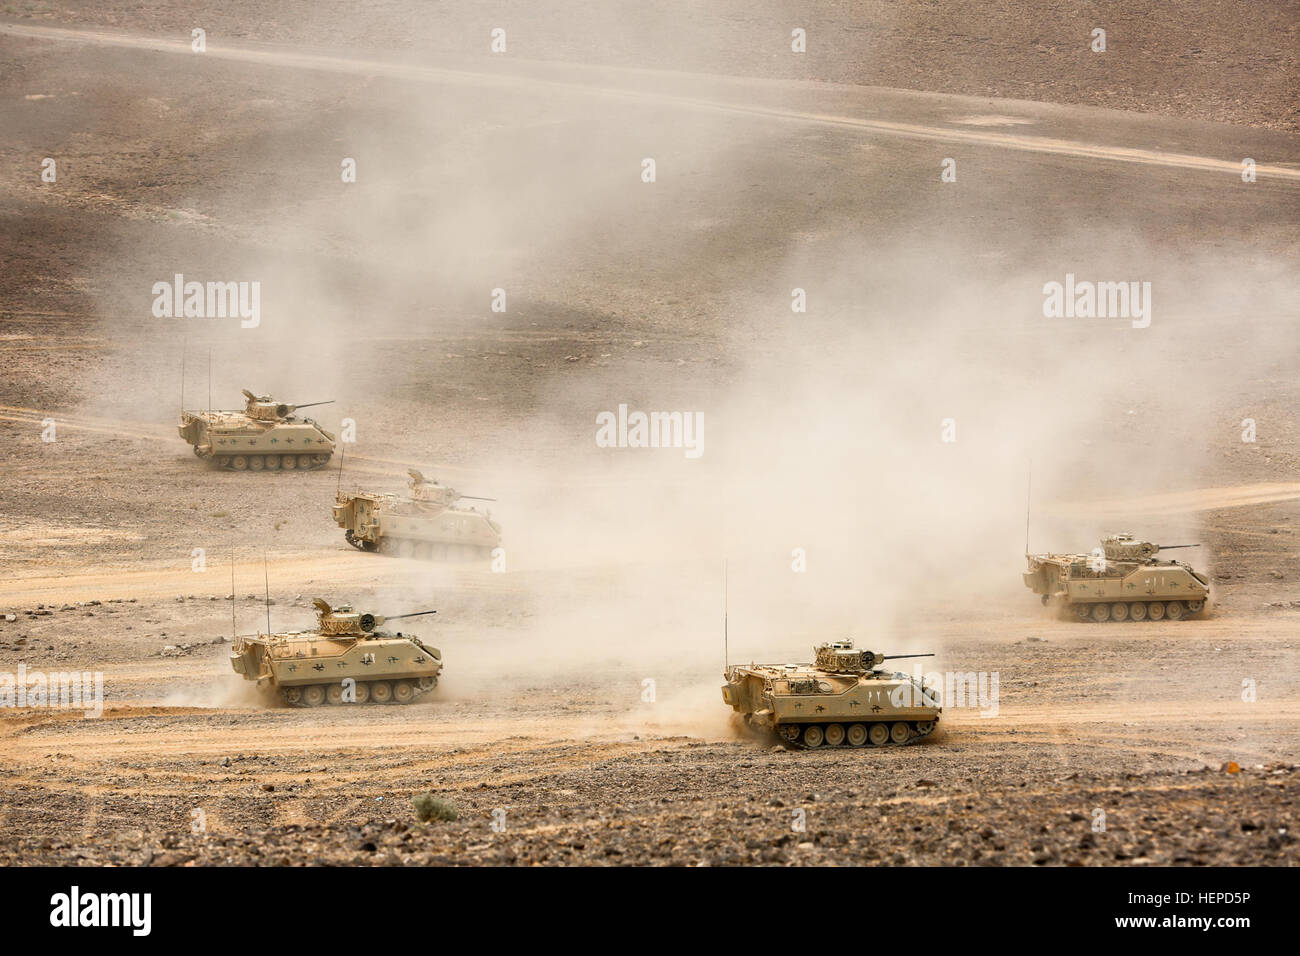 Armored tracked fighting vehicles from the Royal Jordanian Armed Forces charge across the desert in Wadi Shadiyah during a massive military demonstration in front of dignitaries and media, May 18. HRH Prince Feisal, the Supreme Commander of the JAF, Chairman of the Joint Chief-of-Staff Gen. Mashal Al Zaben and Gen. Lloyd Austin III, head of the U.S. Central Command, were among those who attended the culminating event of the two-week, multinational Exercise Eager Lion 2015. In addition to the U.S. and the Hashemite Kingdom of Jordan, participating nations included Australia, Bahrain, Belgium, C Stock Photo